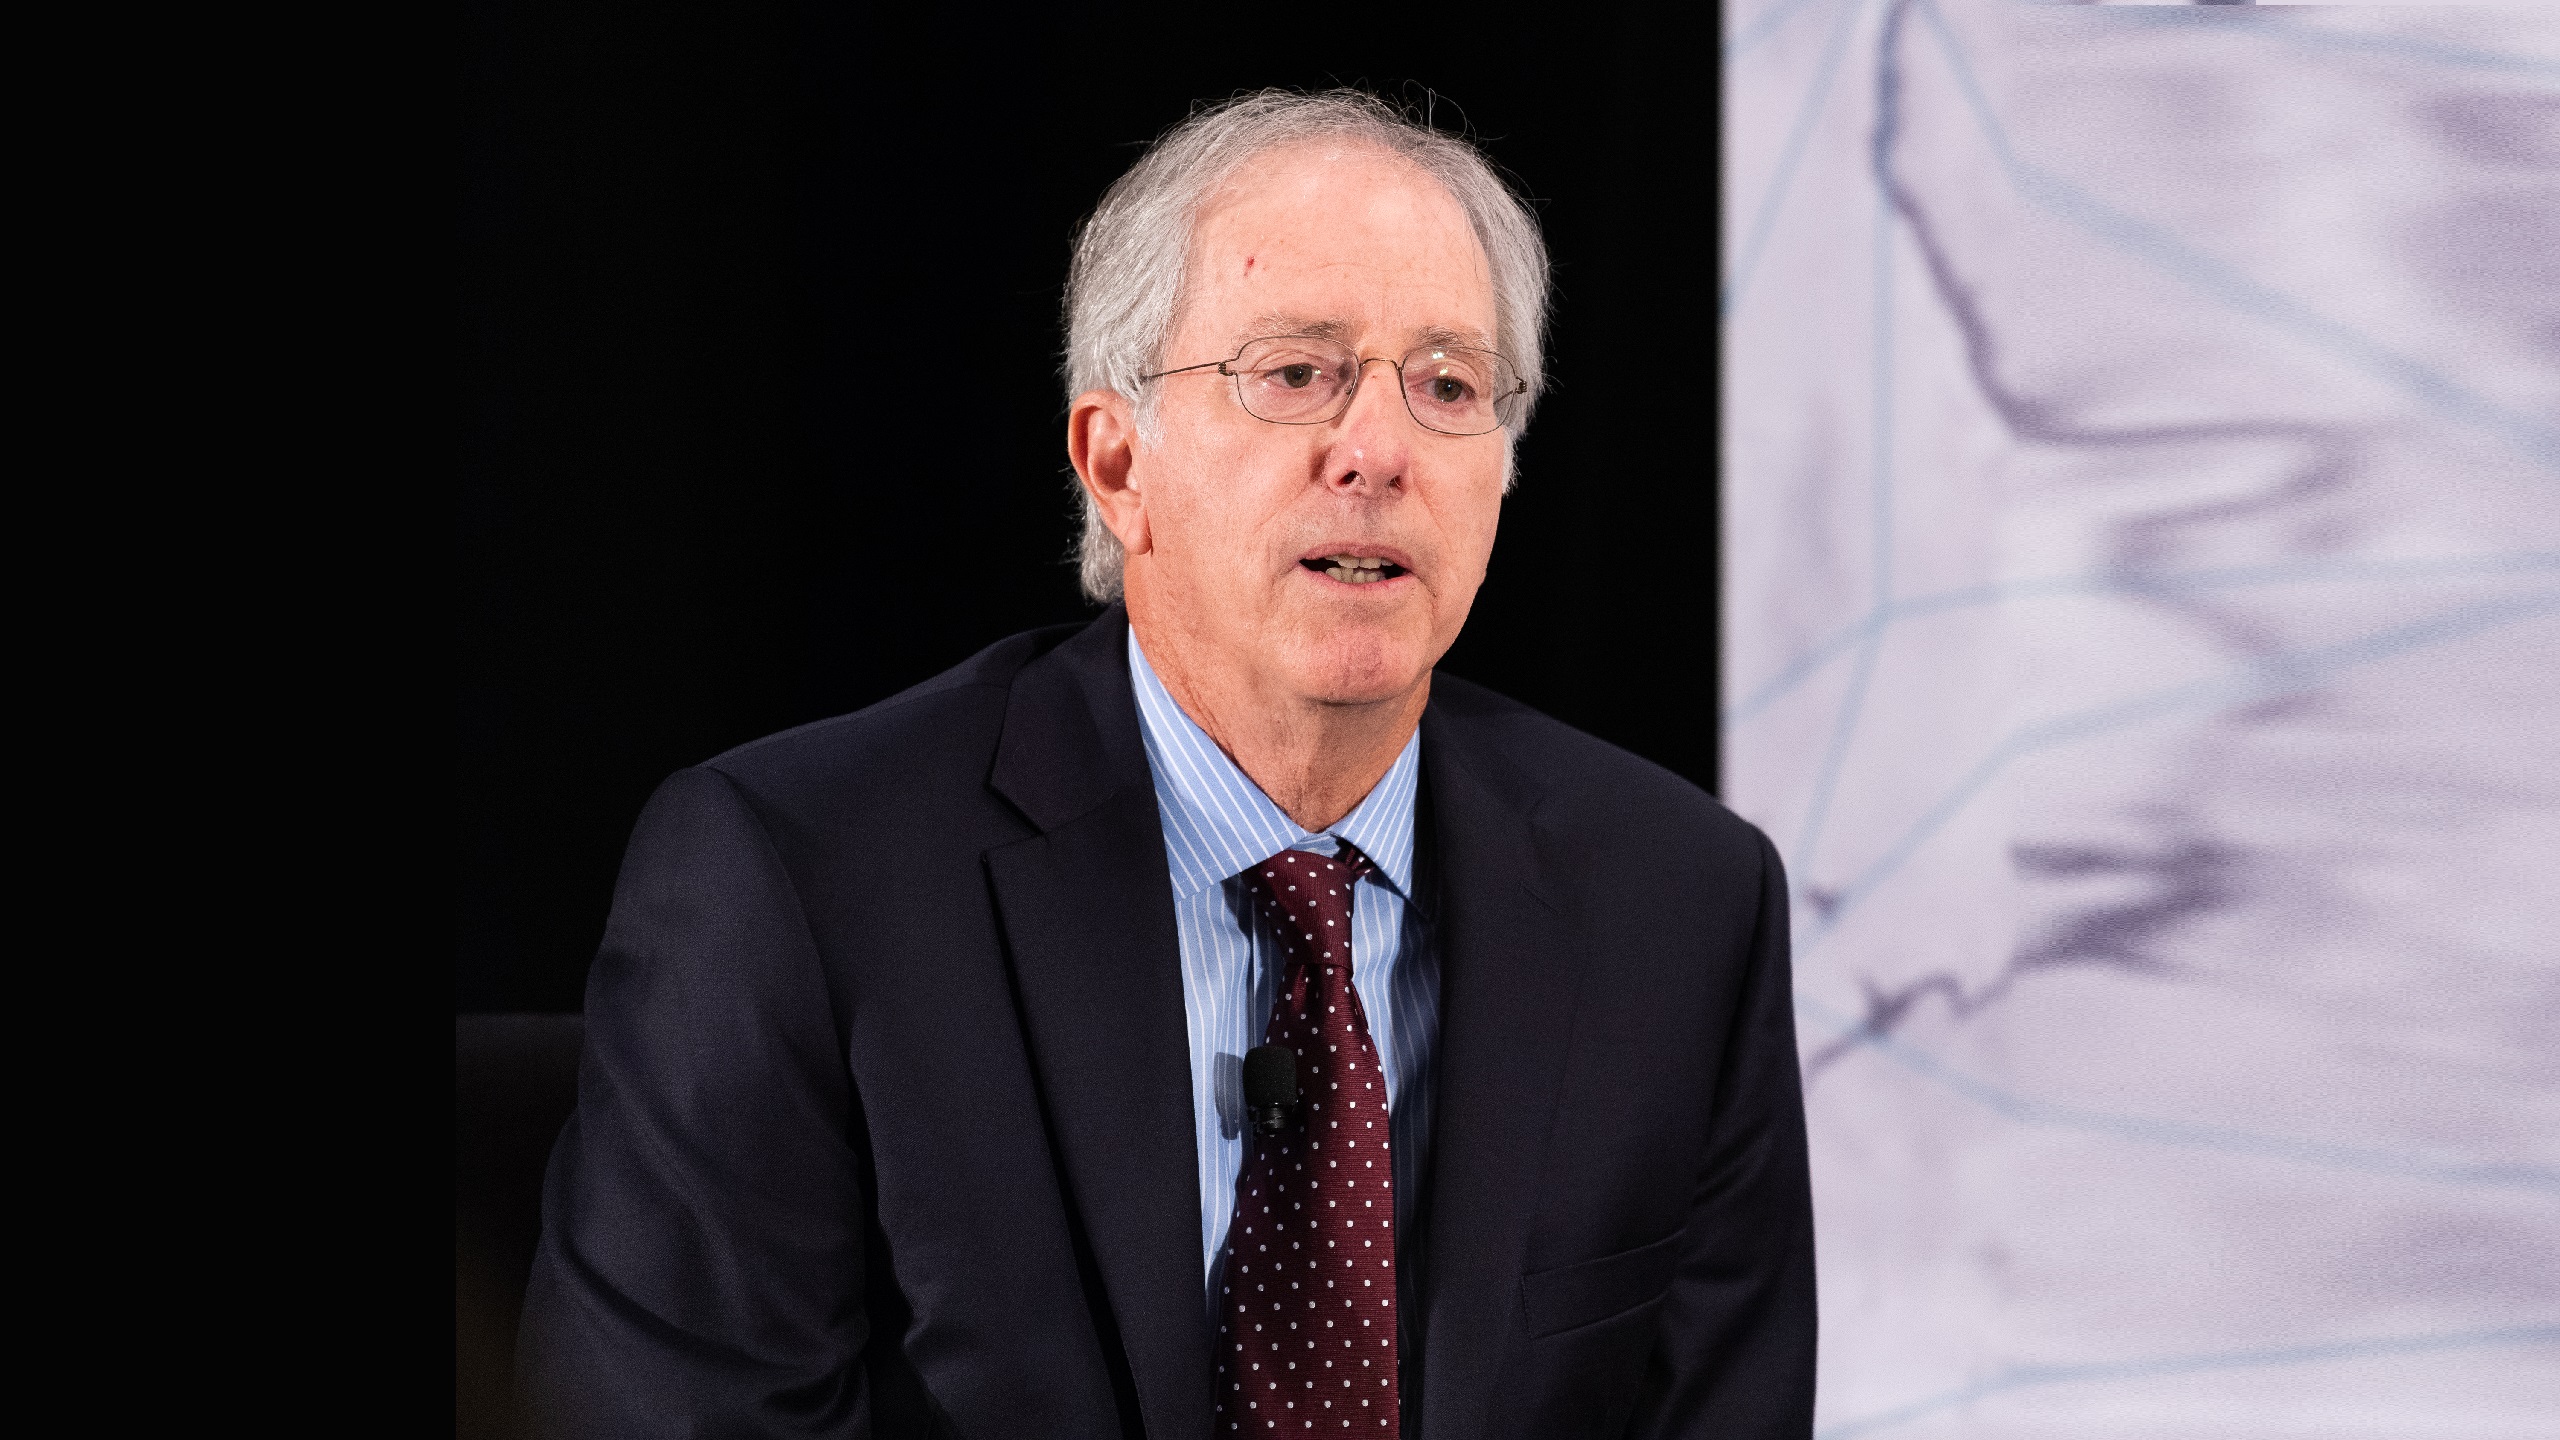 Dennis Ross to TML: Israel Must Recognize the Longer-Term US-Israeli Relationship’s Well-Being